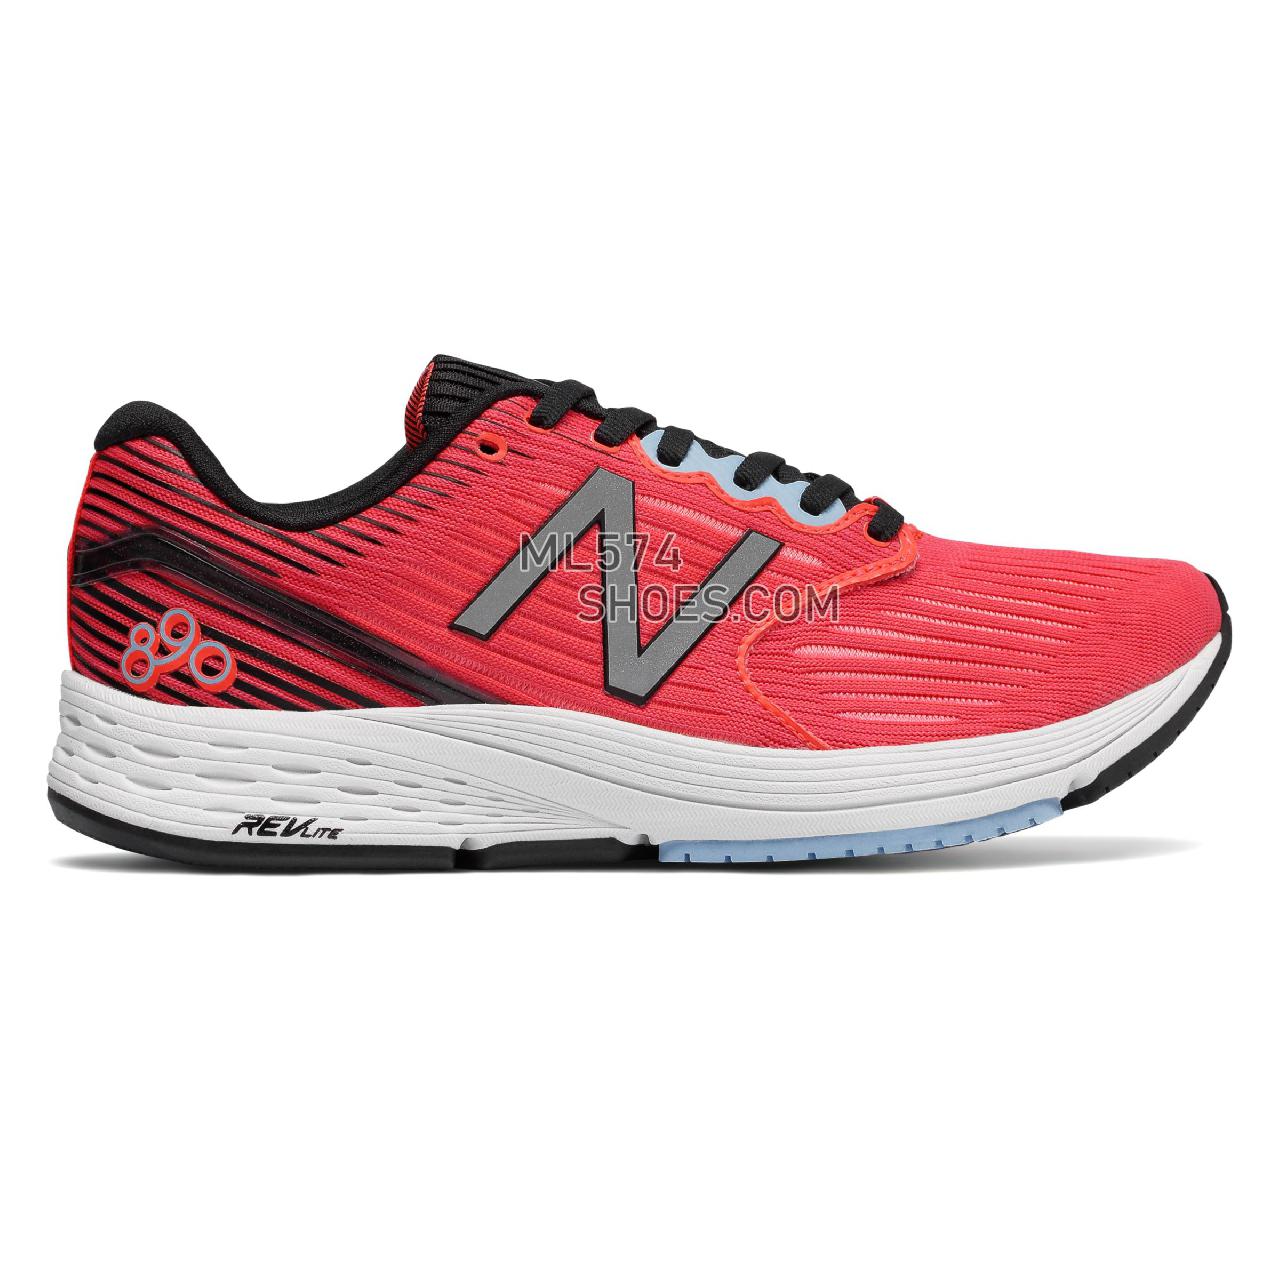 New Balance 890v6 - Women's 890 - Running Coral with Black and Clear Sky - W890CB6